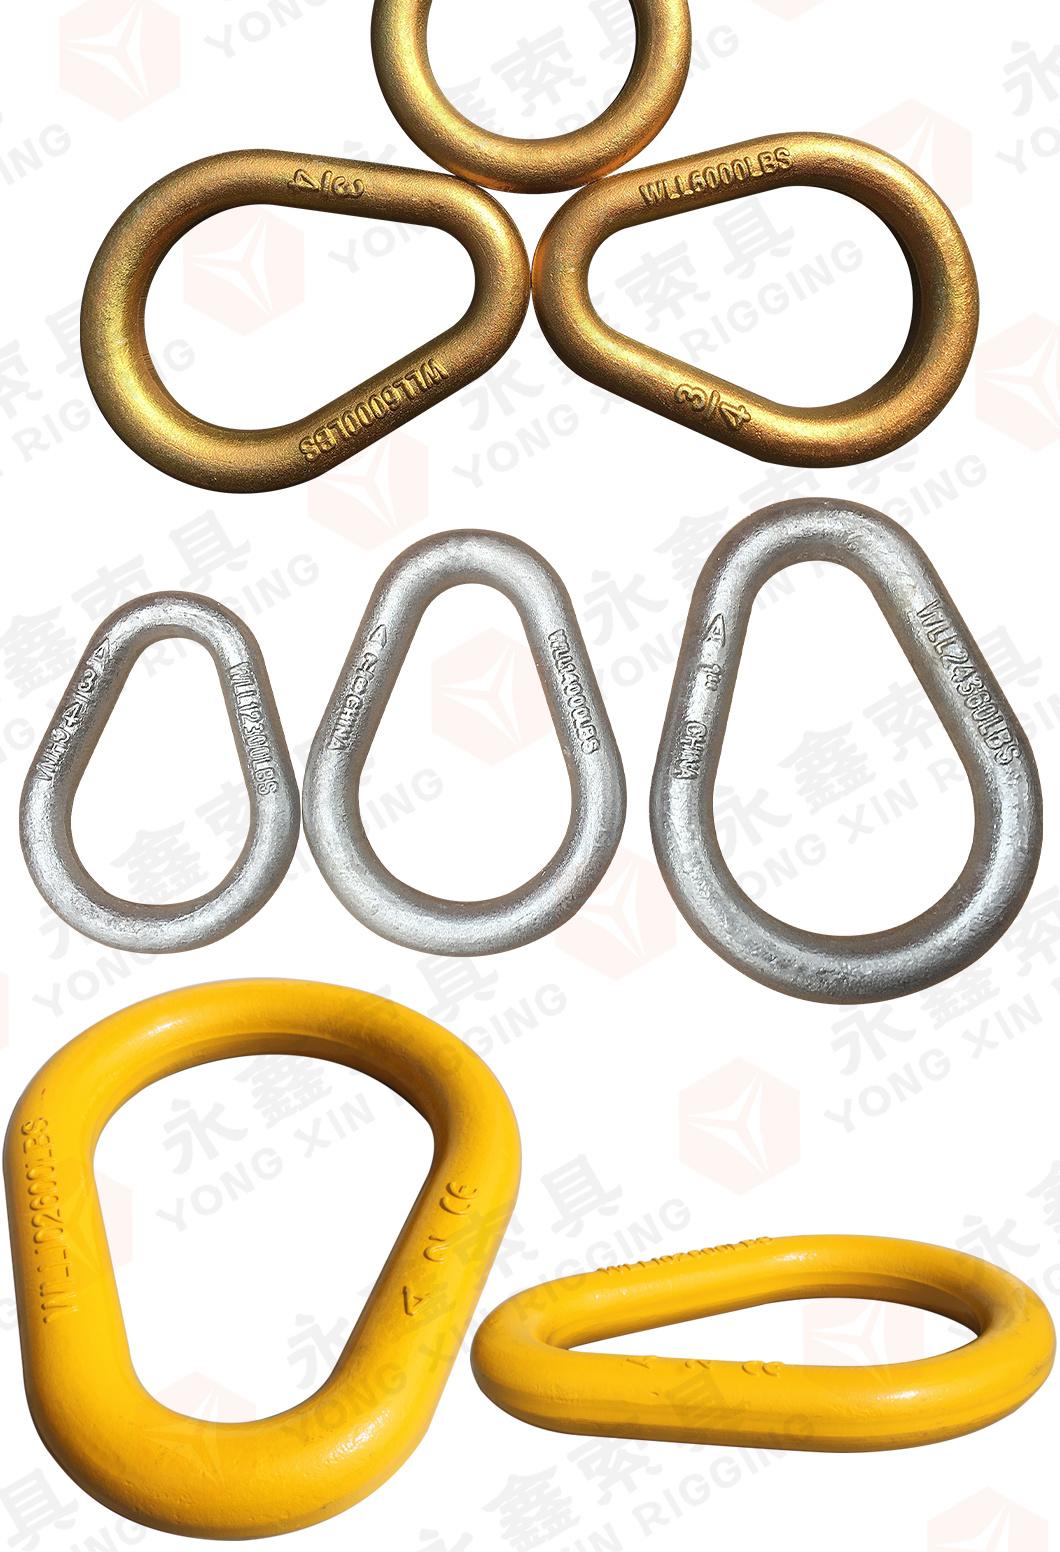 Rigging Hardware Drop Forged Alloy Steel Pear Shaped Link|Forged Pear Shape Link|Master Link